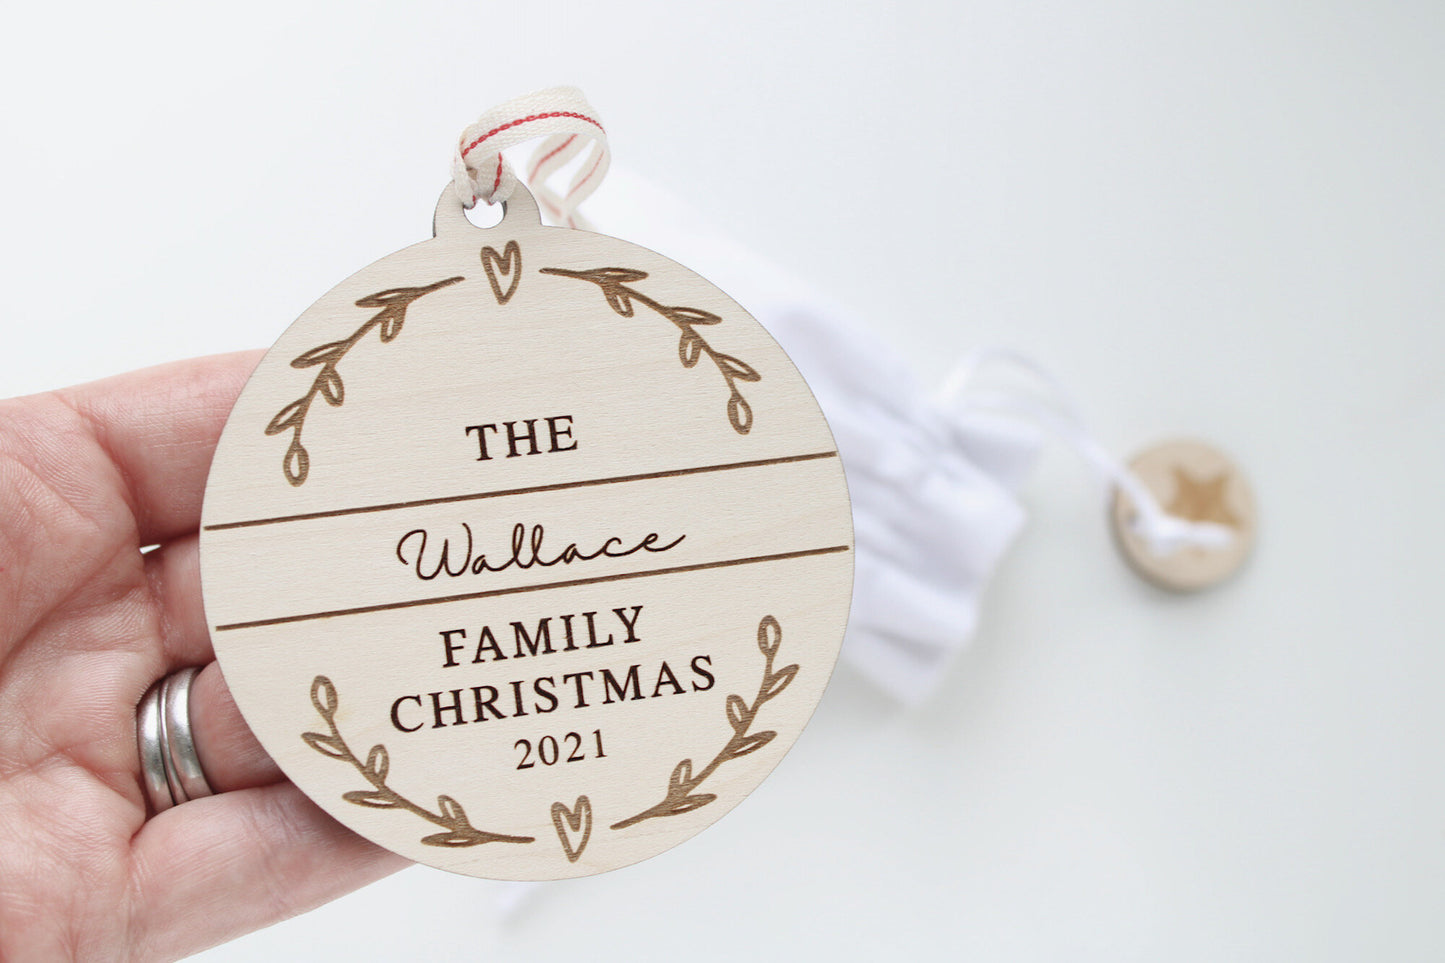 Family Christmas bauble decoration